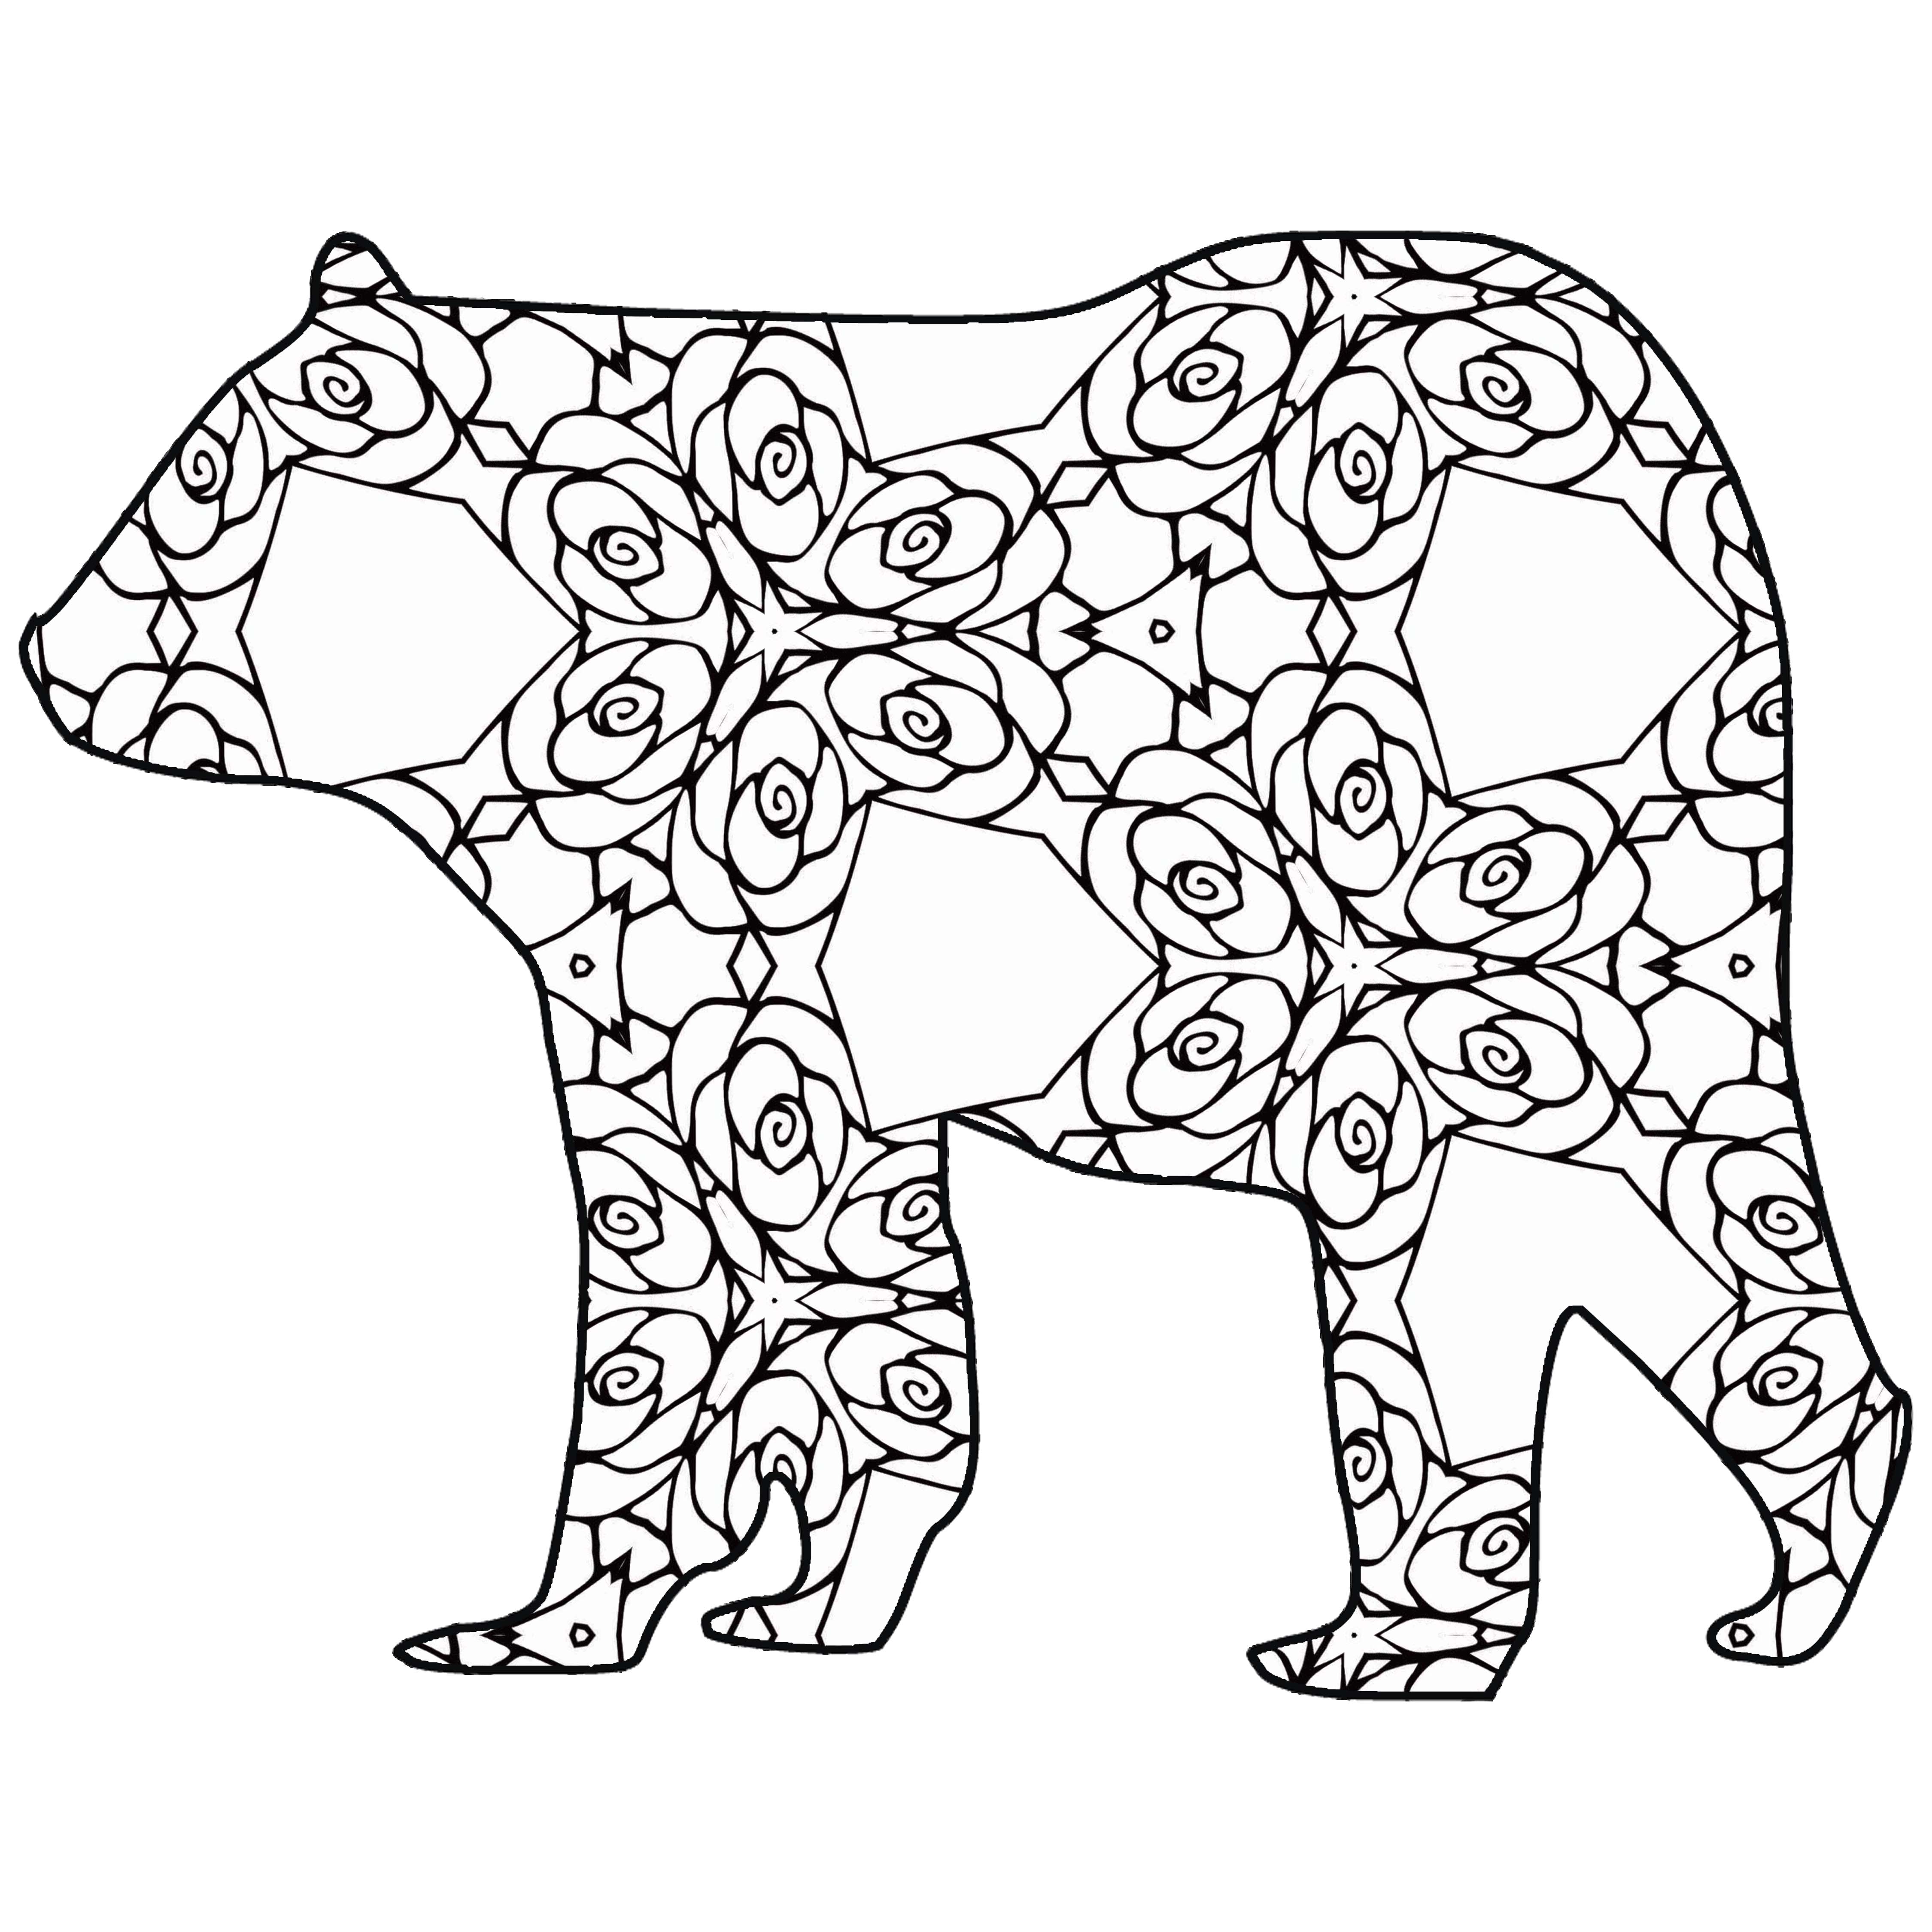 Coloring Pages - Animals 5